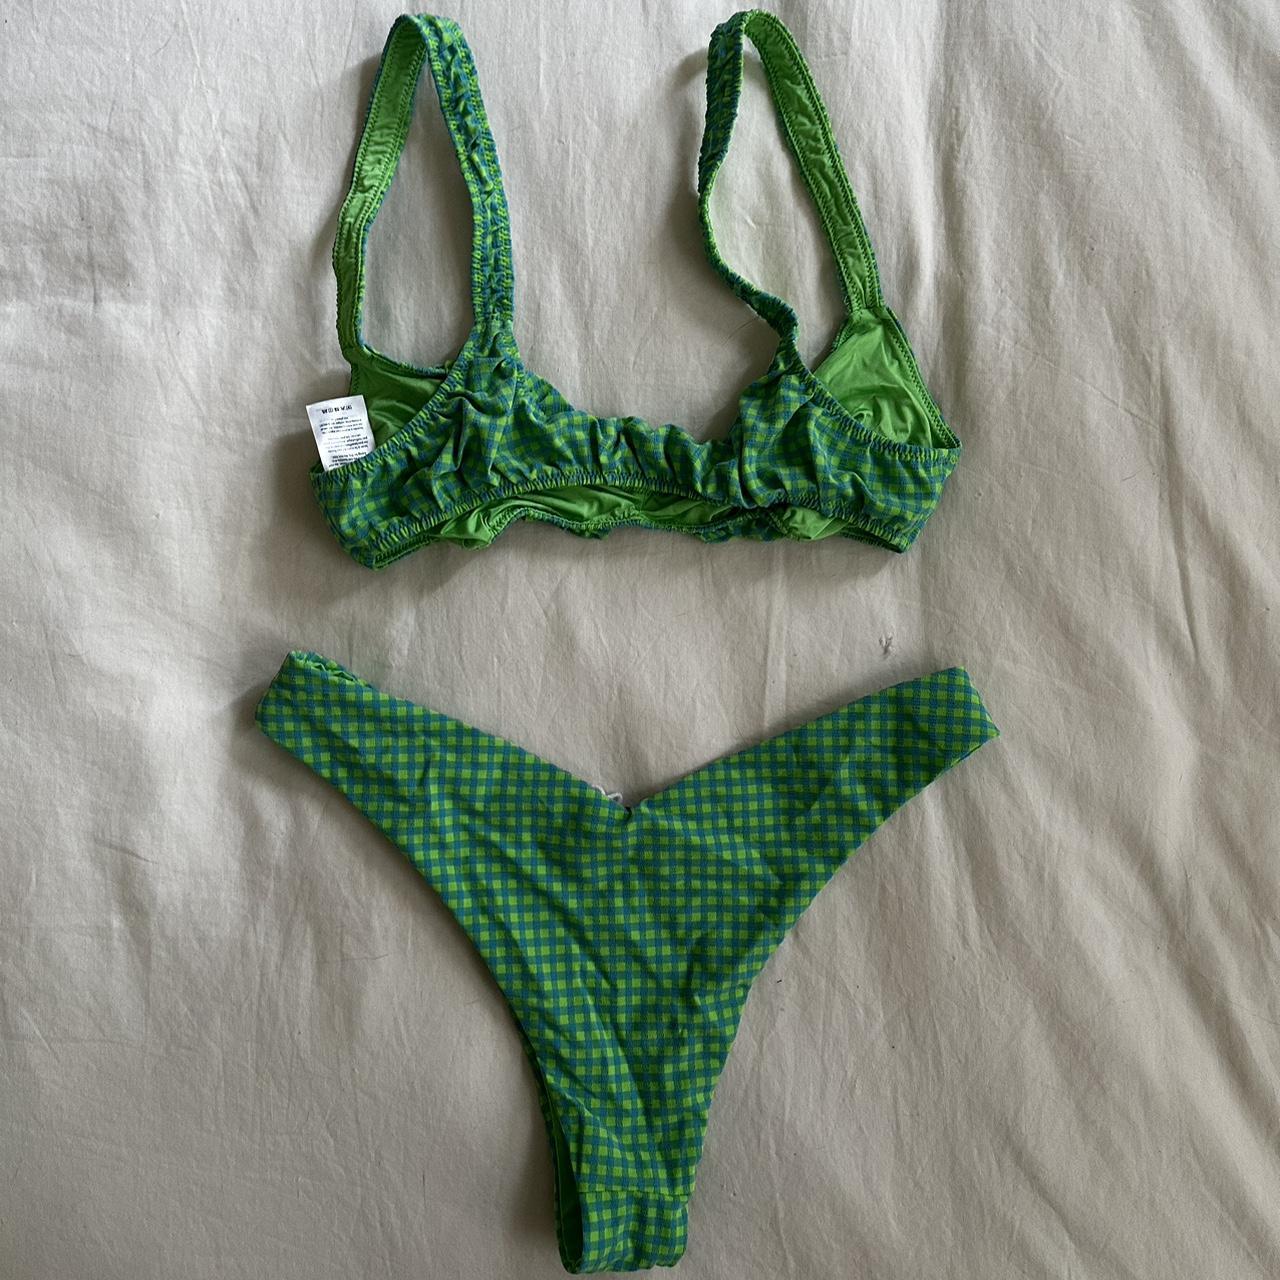 We Wore What Men's Green and Blue Bikinis-and-tankini-sets (2)